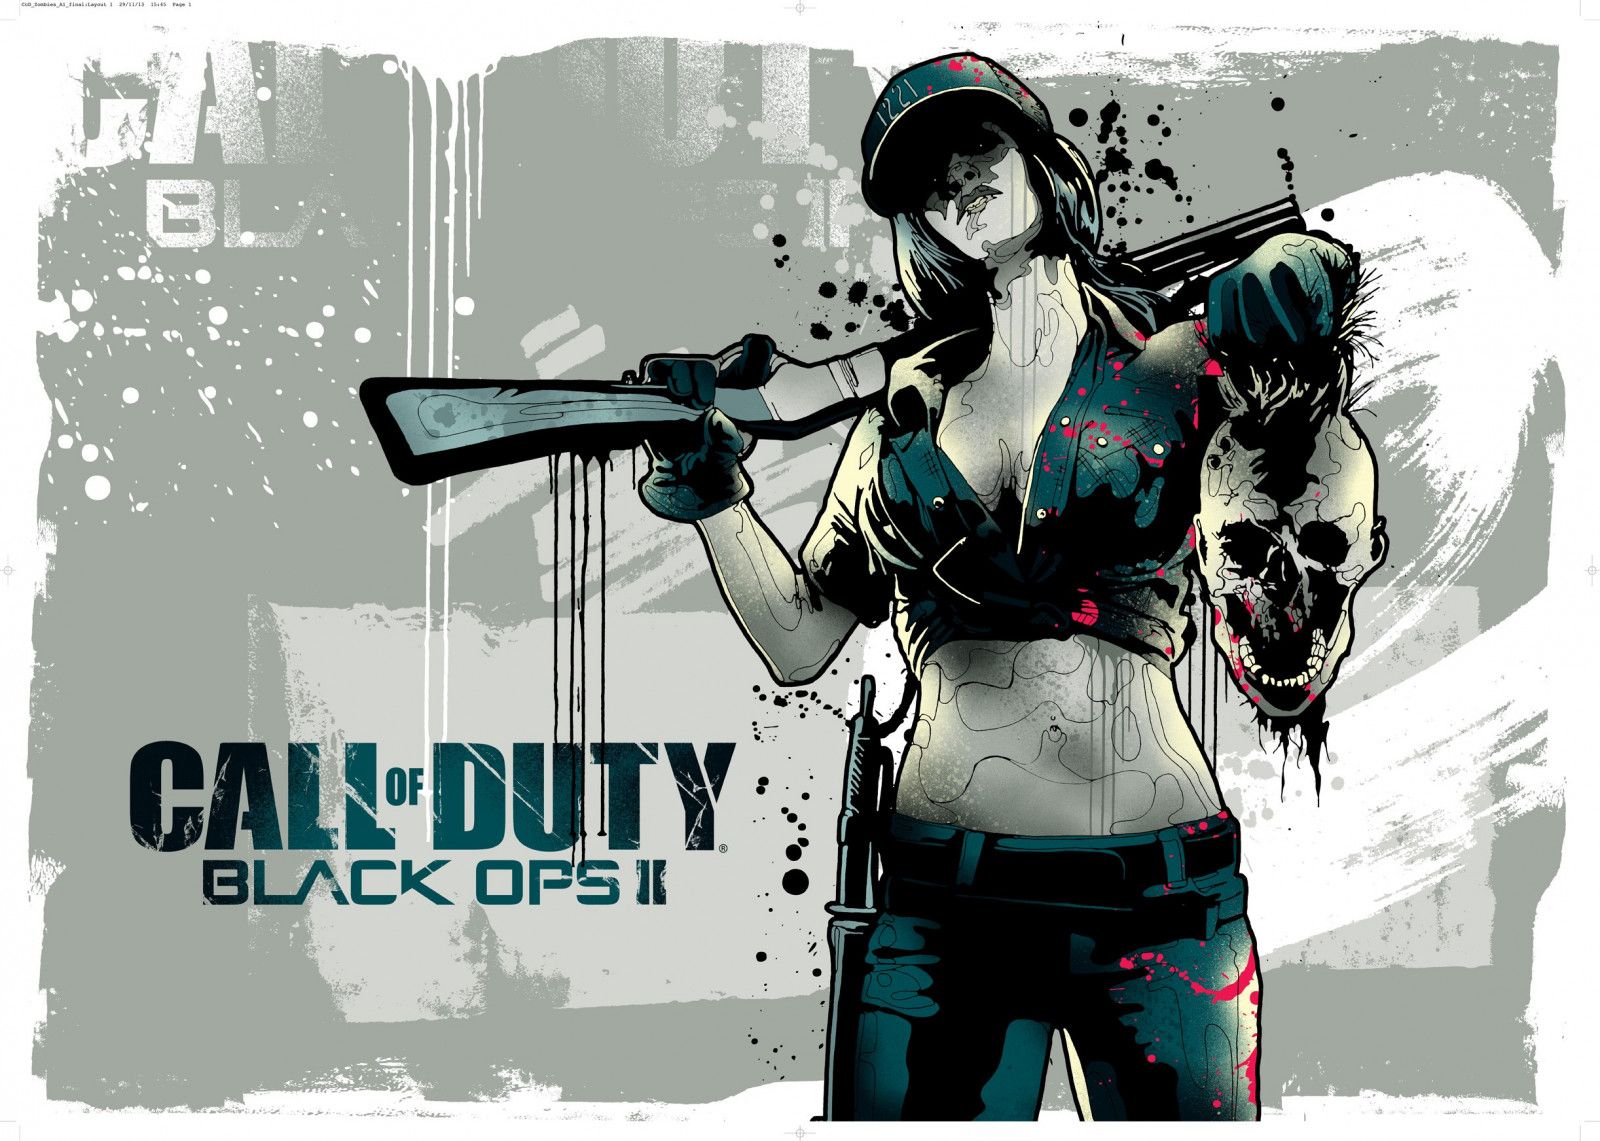 Wallpaper, illustration, anime, soldier, cartoon, Call of Duty, comics, poster, Call of Duty Black Ops II 2444x1744